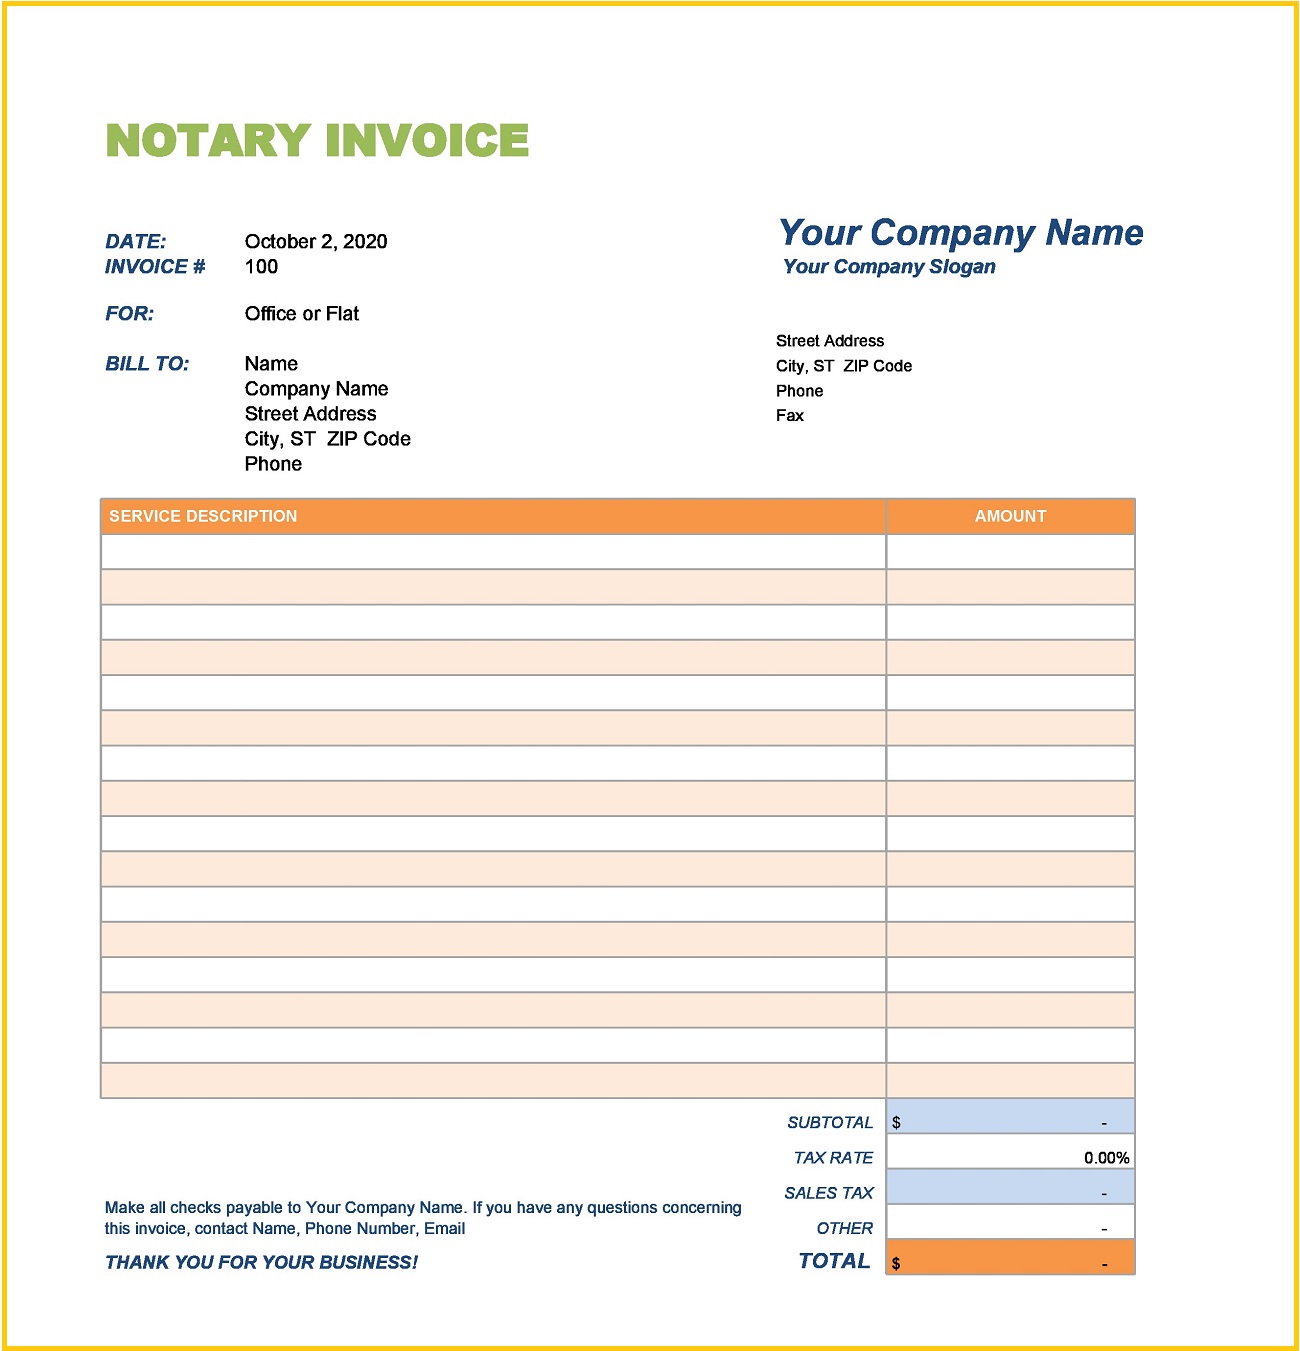 sample of printable notary invoice template